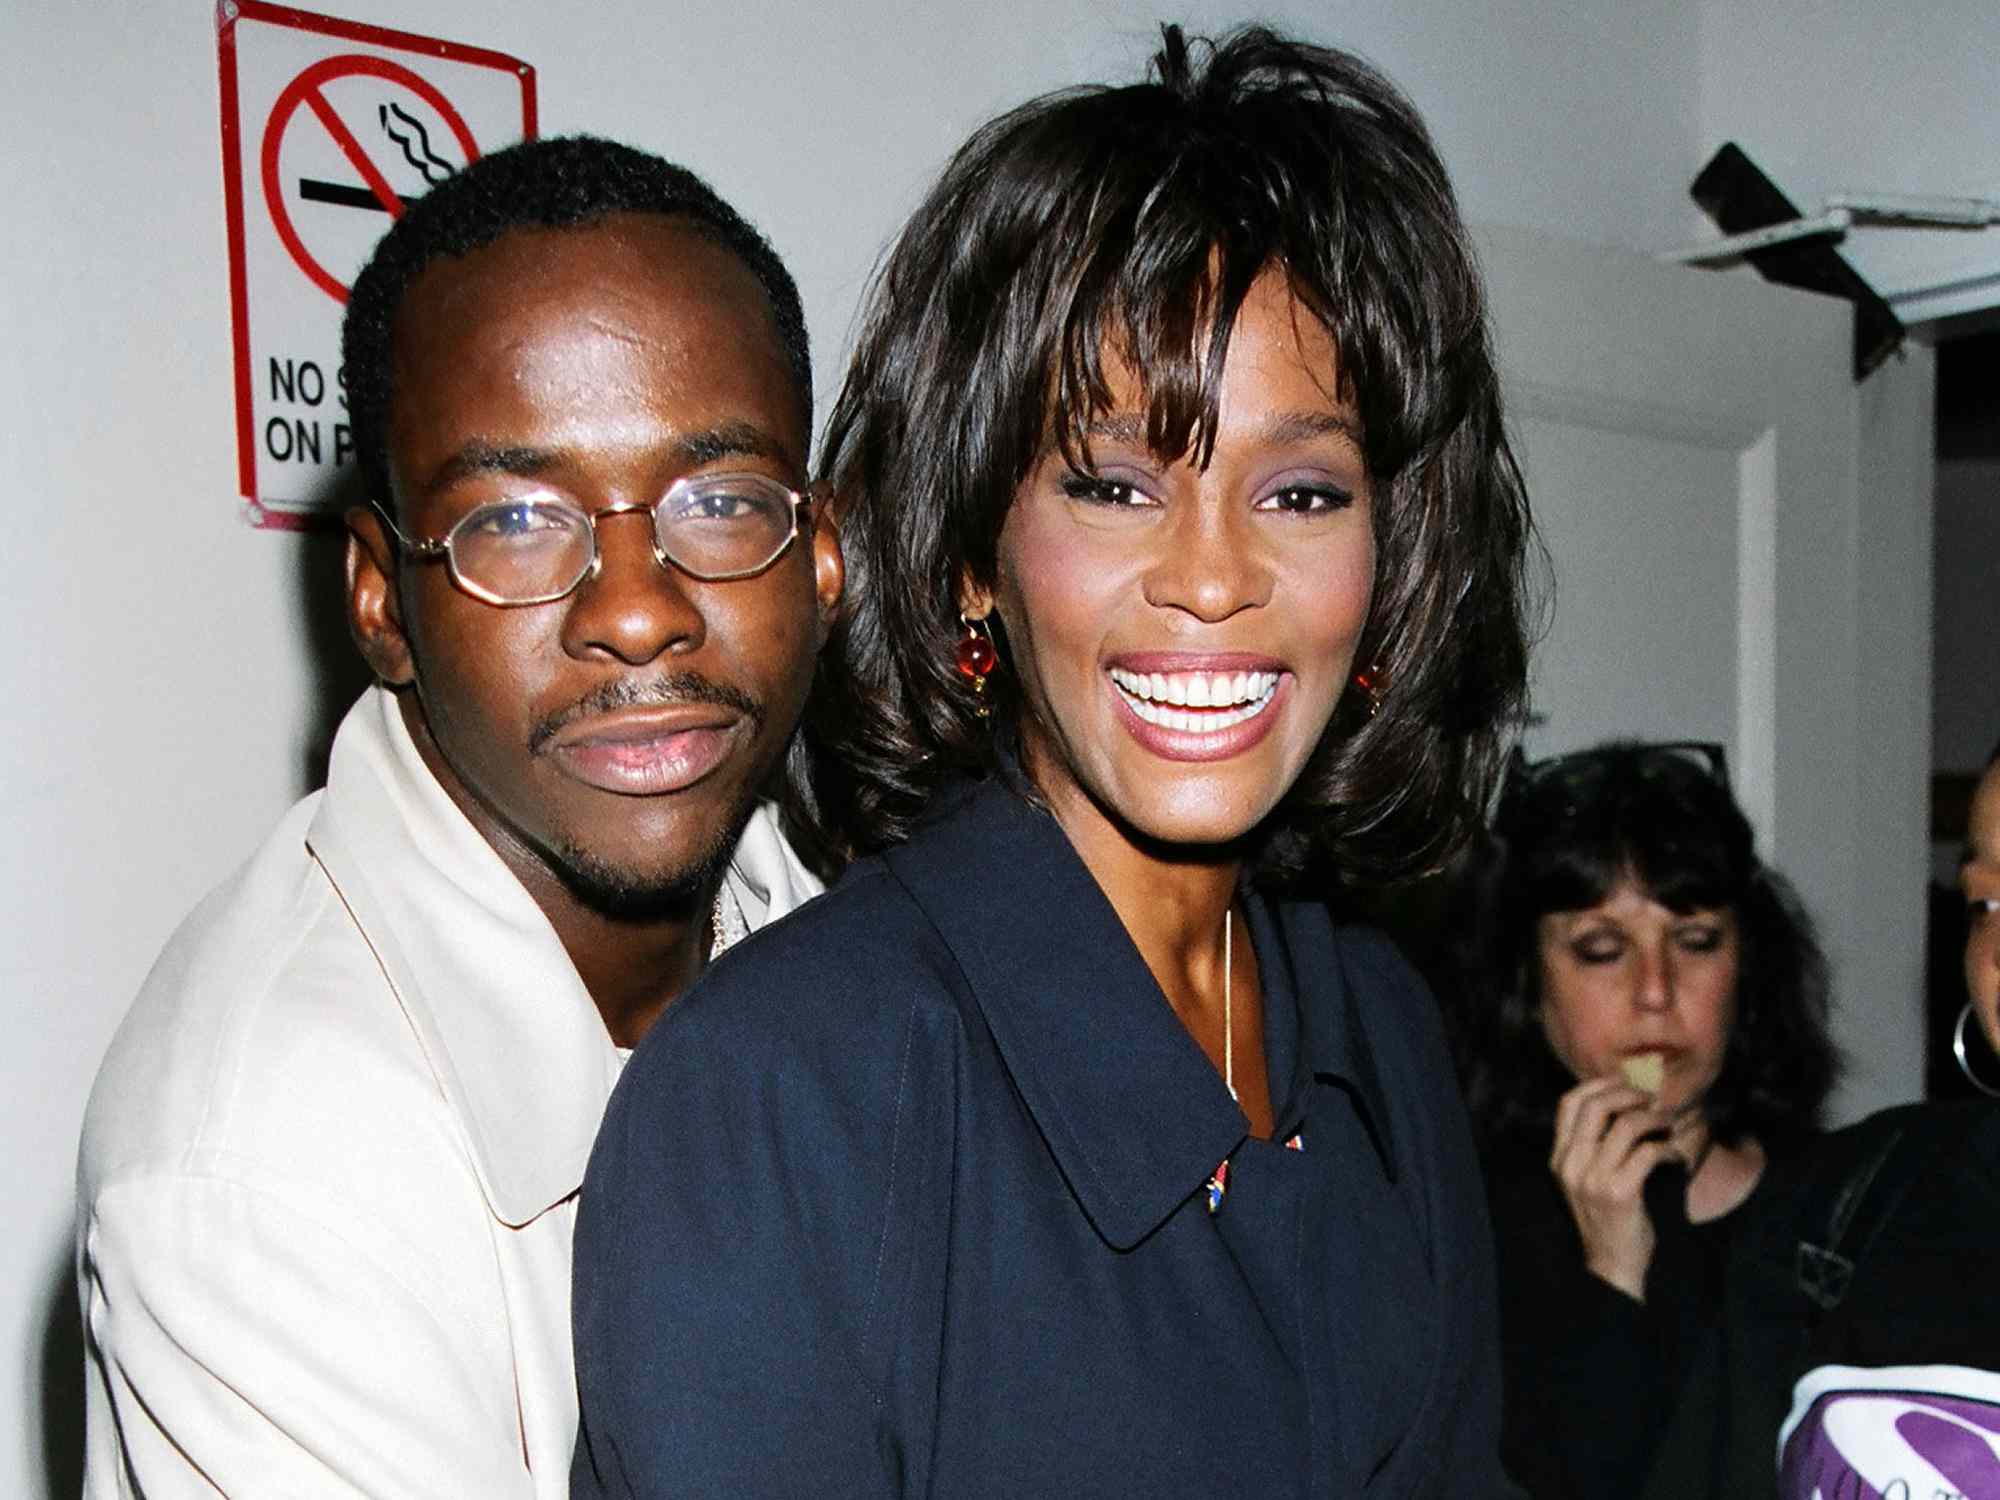 Bobby Brown & Whitney Houston during 1995 MTV Video Music Awards Show at Radio City Music Hall in New York City, New York, United StatesBobby Brown & Whitney Houston during 1995 MTV Video Music Awards Show at Radio City Music Hall in New York City, New York, United States